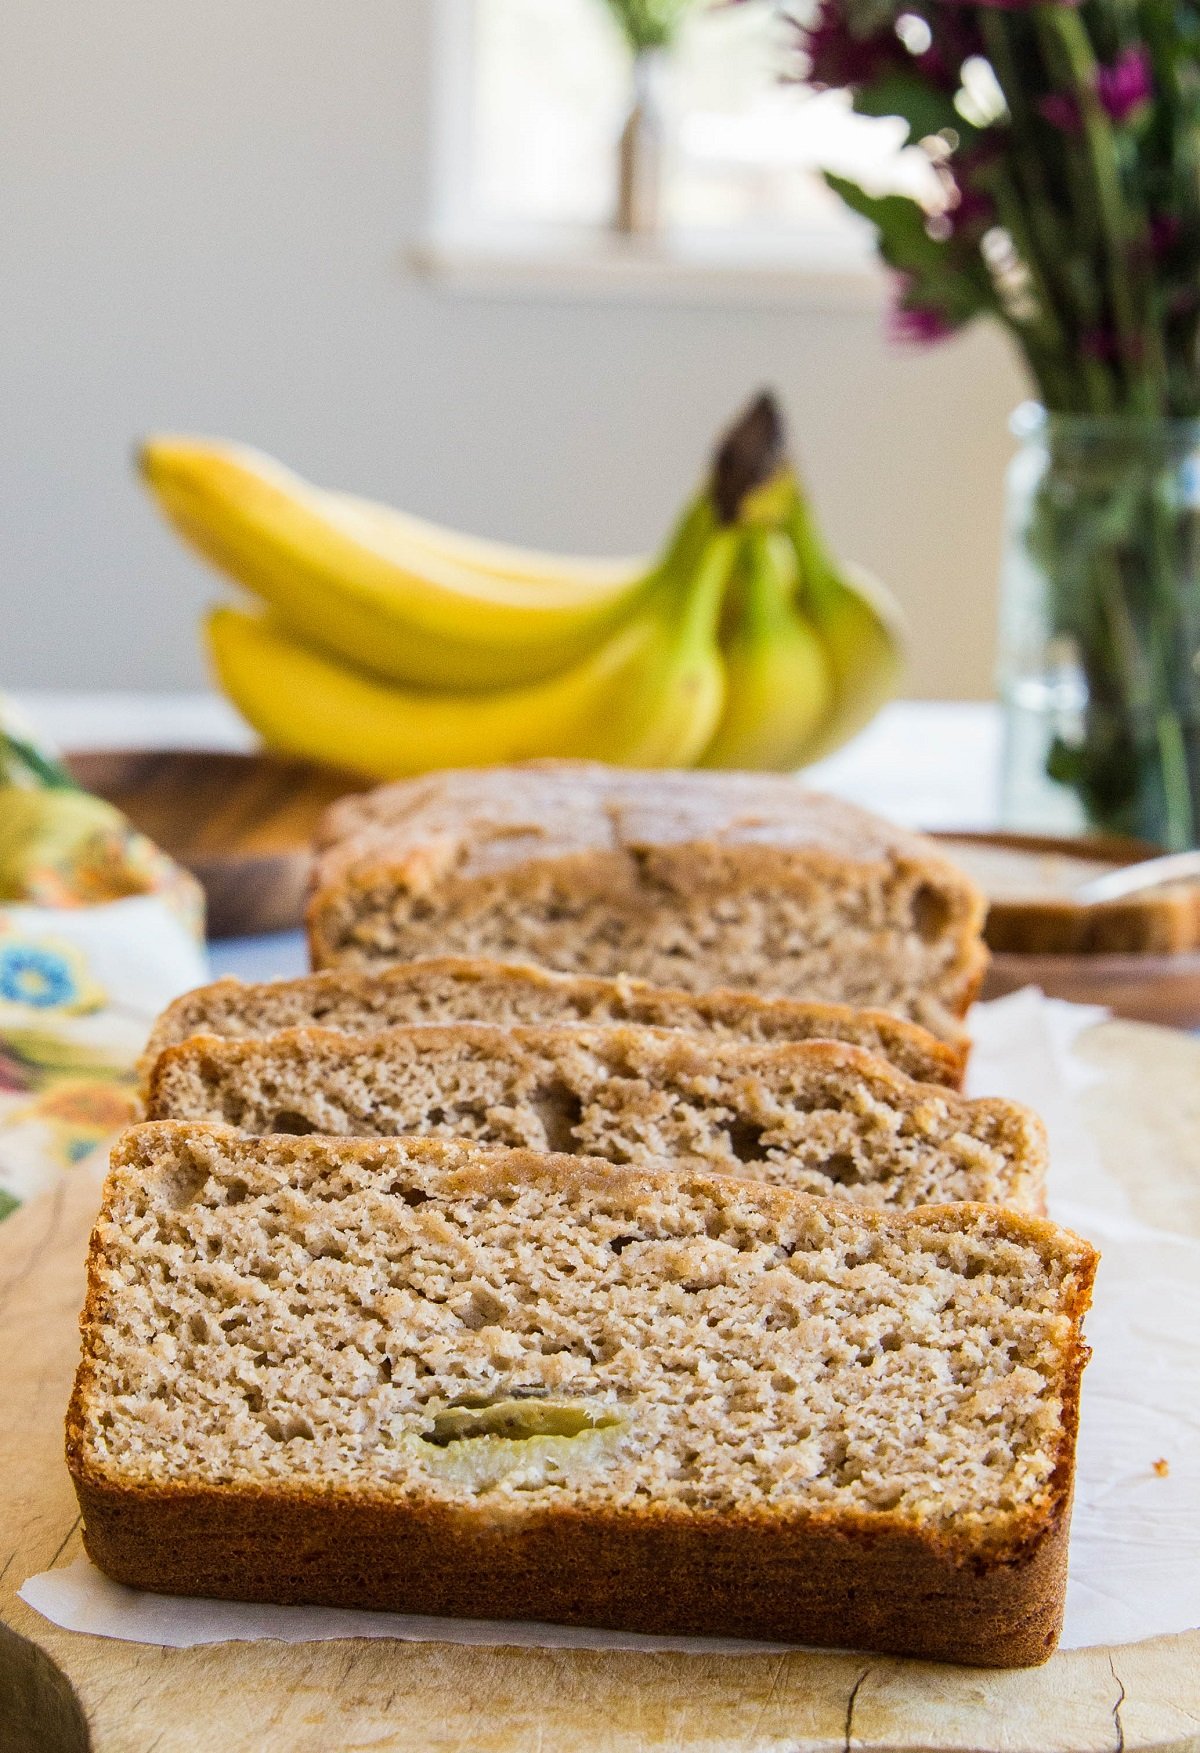 Loaf of paleo banana bread cut into slices on a wooden cutting board